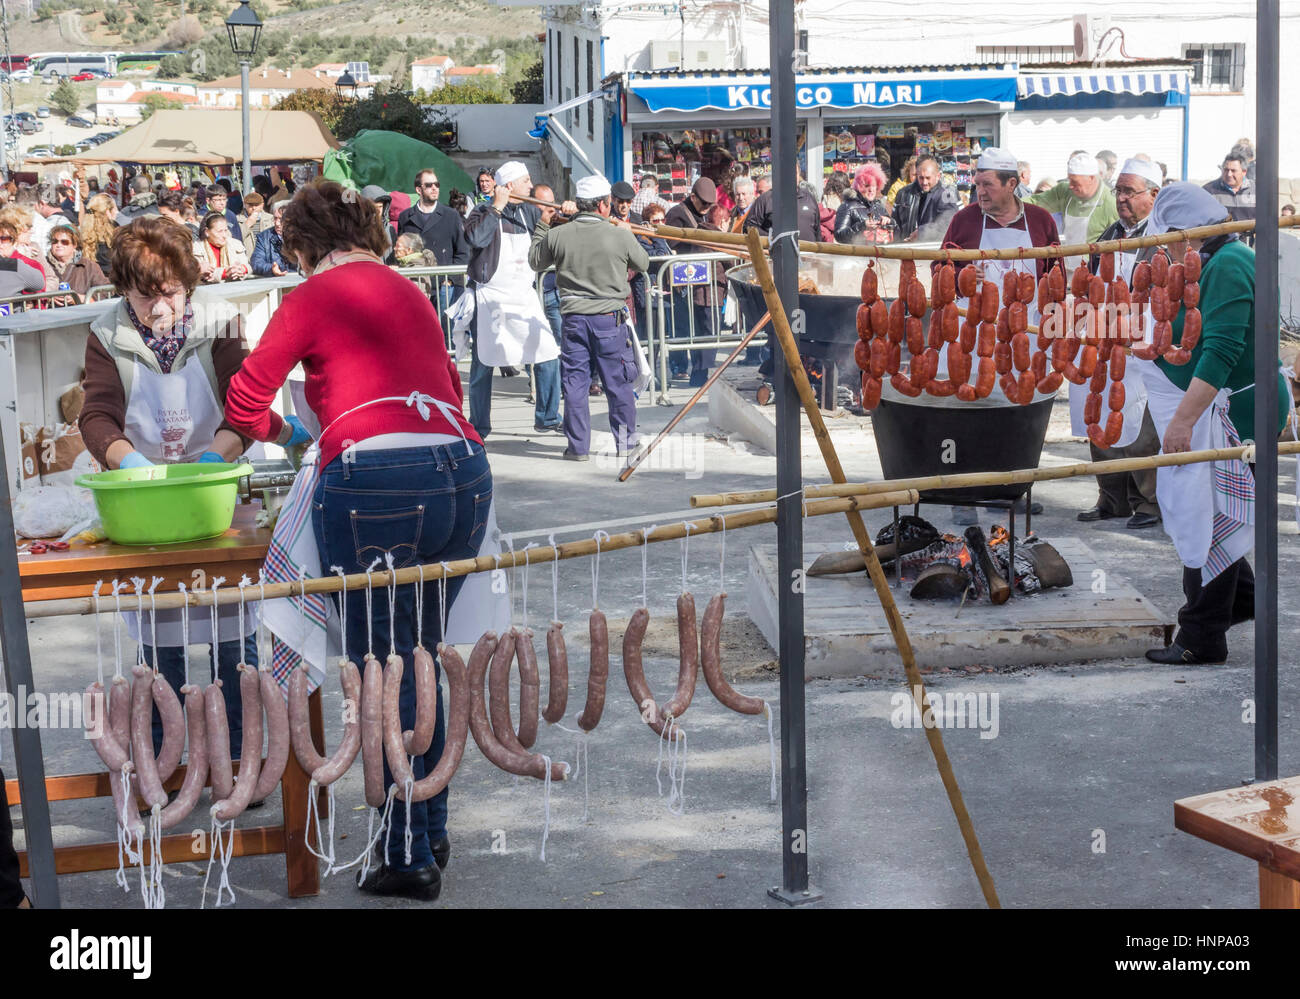 Ardales, Malaga Province, Andalusia, Spain. The annual Dia de la Matanza or Festival of the Slaughter. On this day women and men of the village recrea Stock Photo